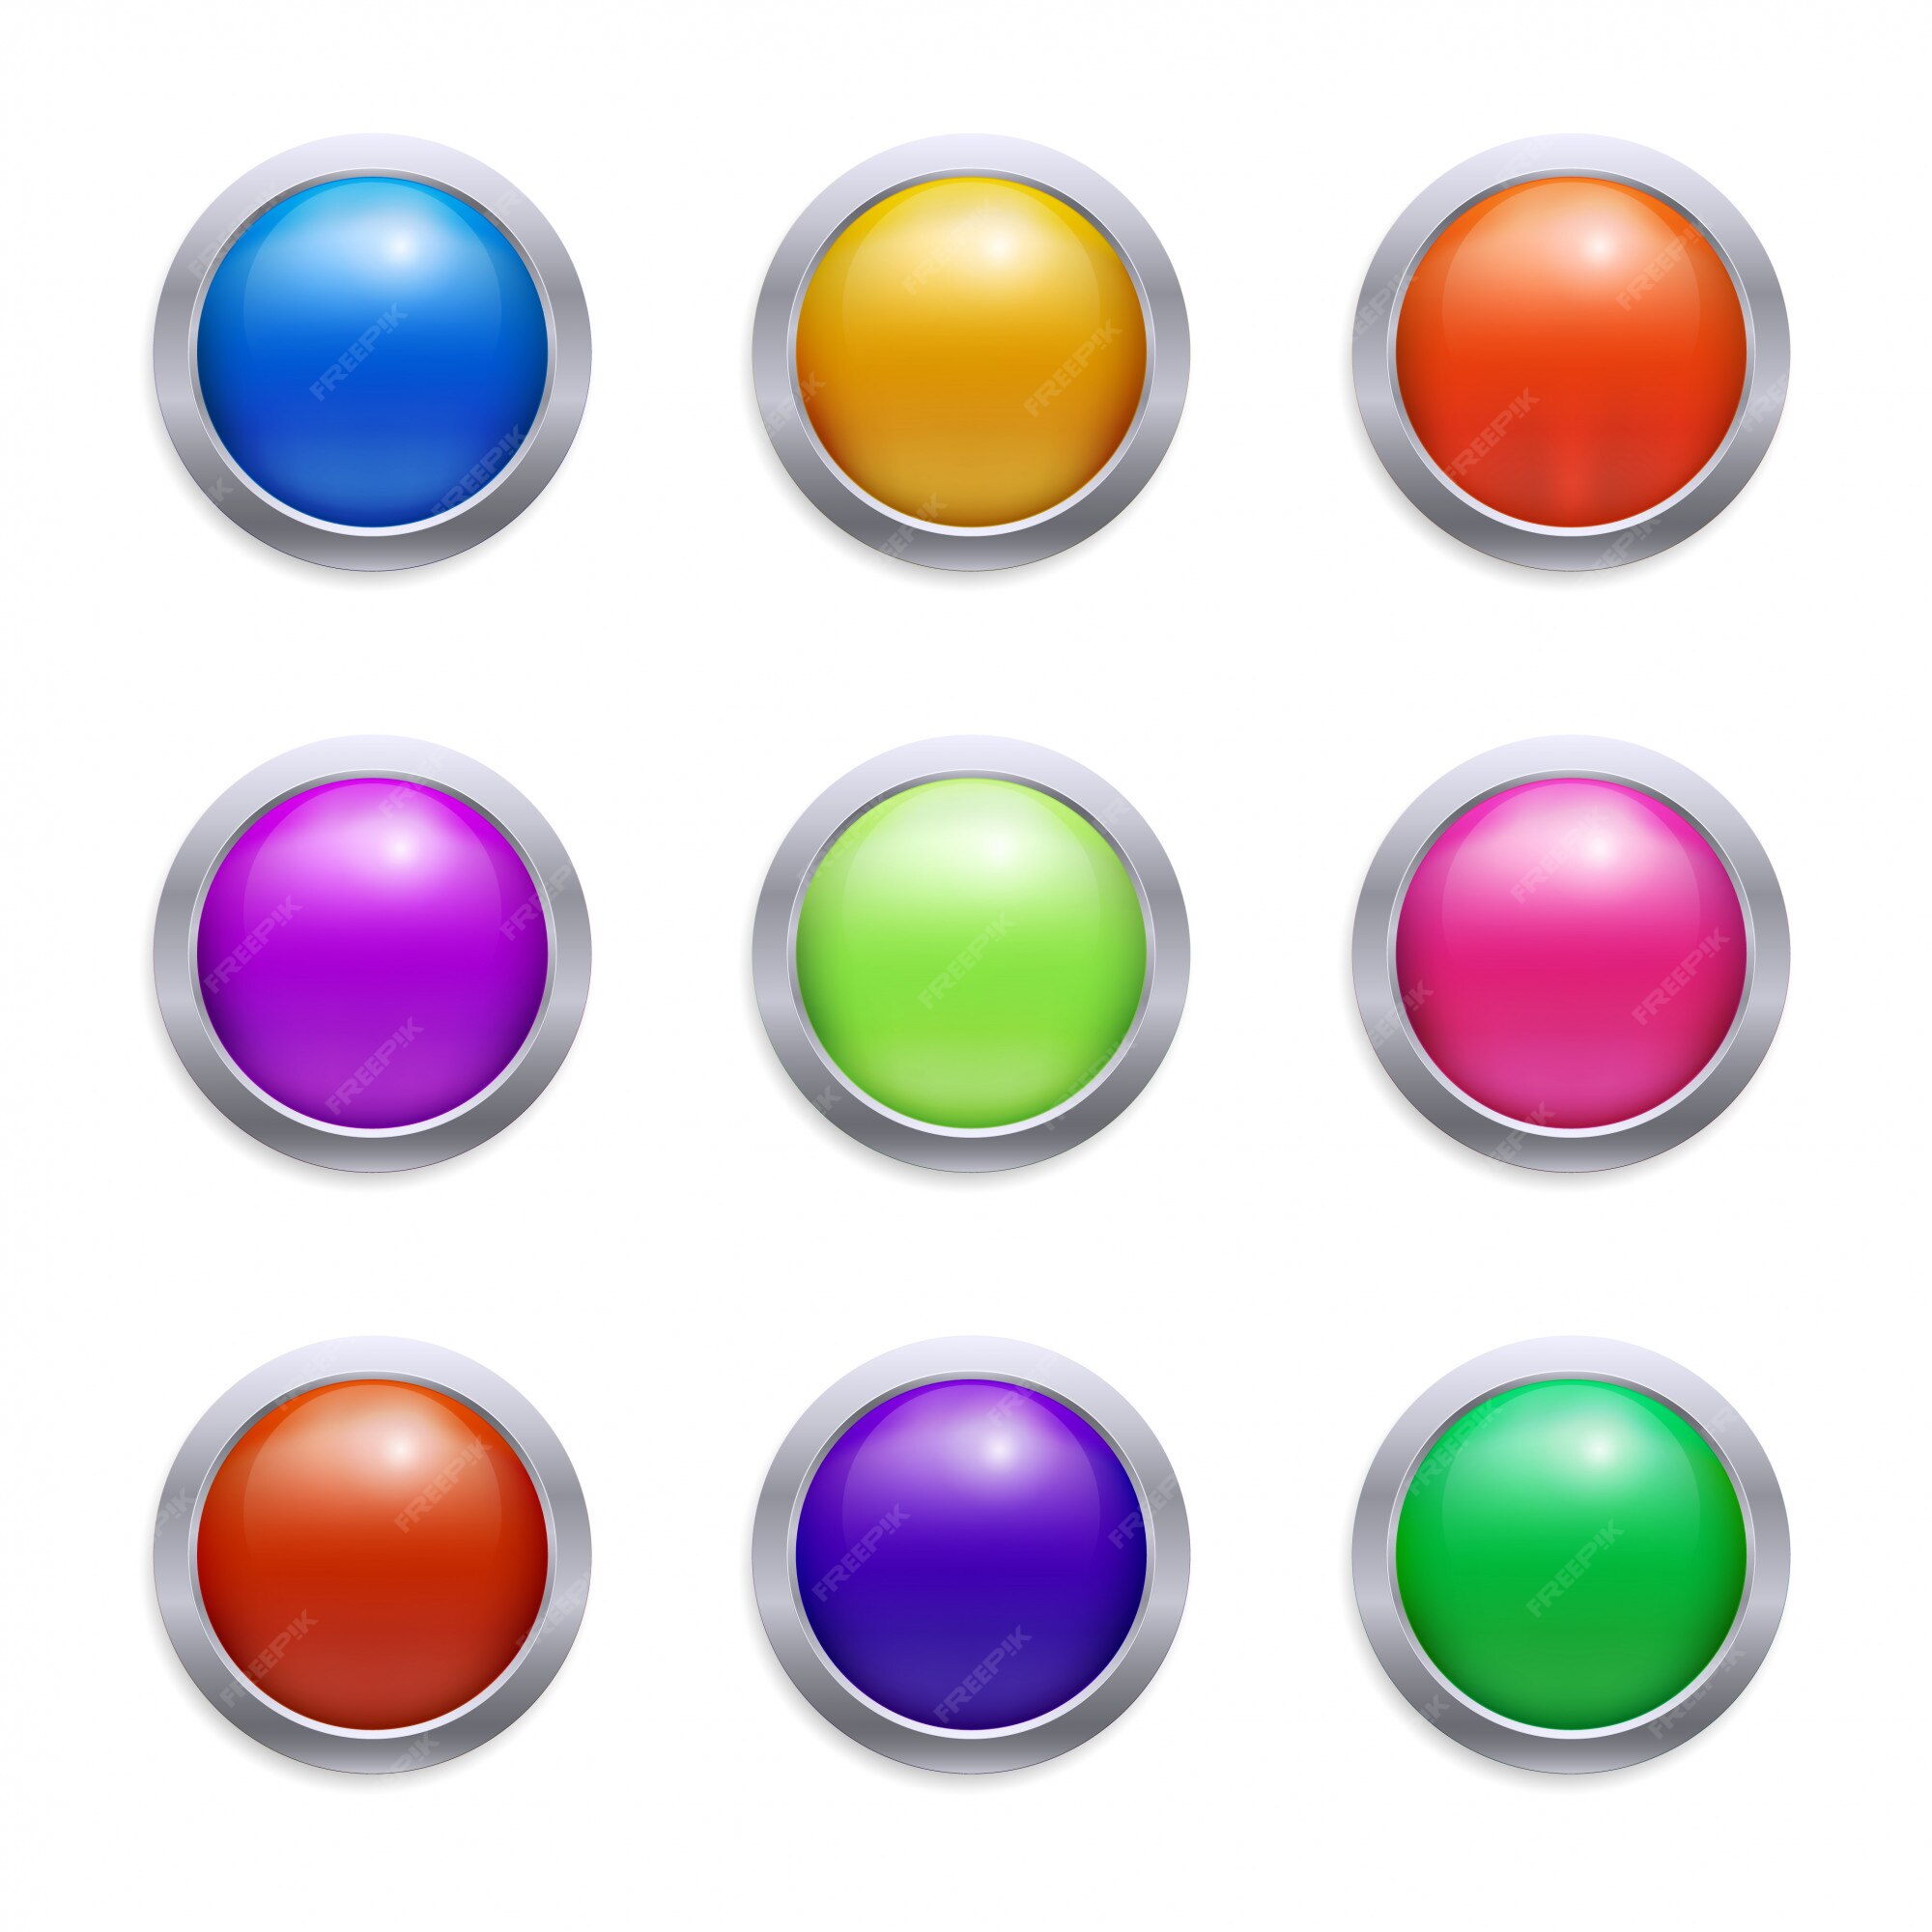 Decorative Buttons Images - Free Download on Freepik